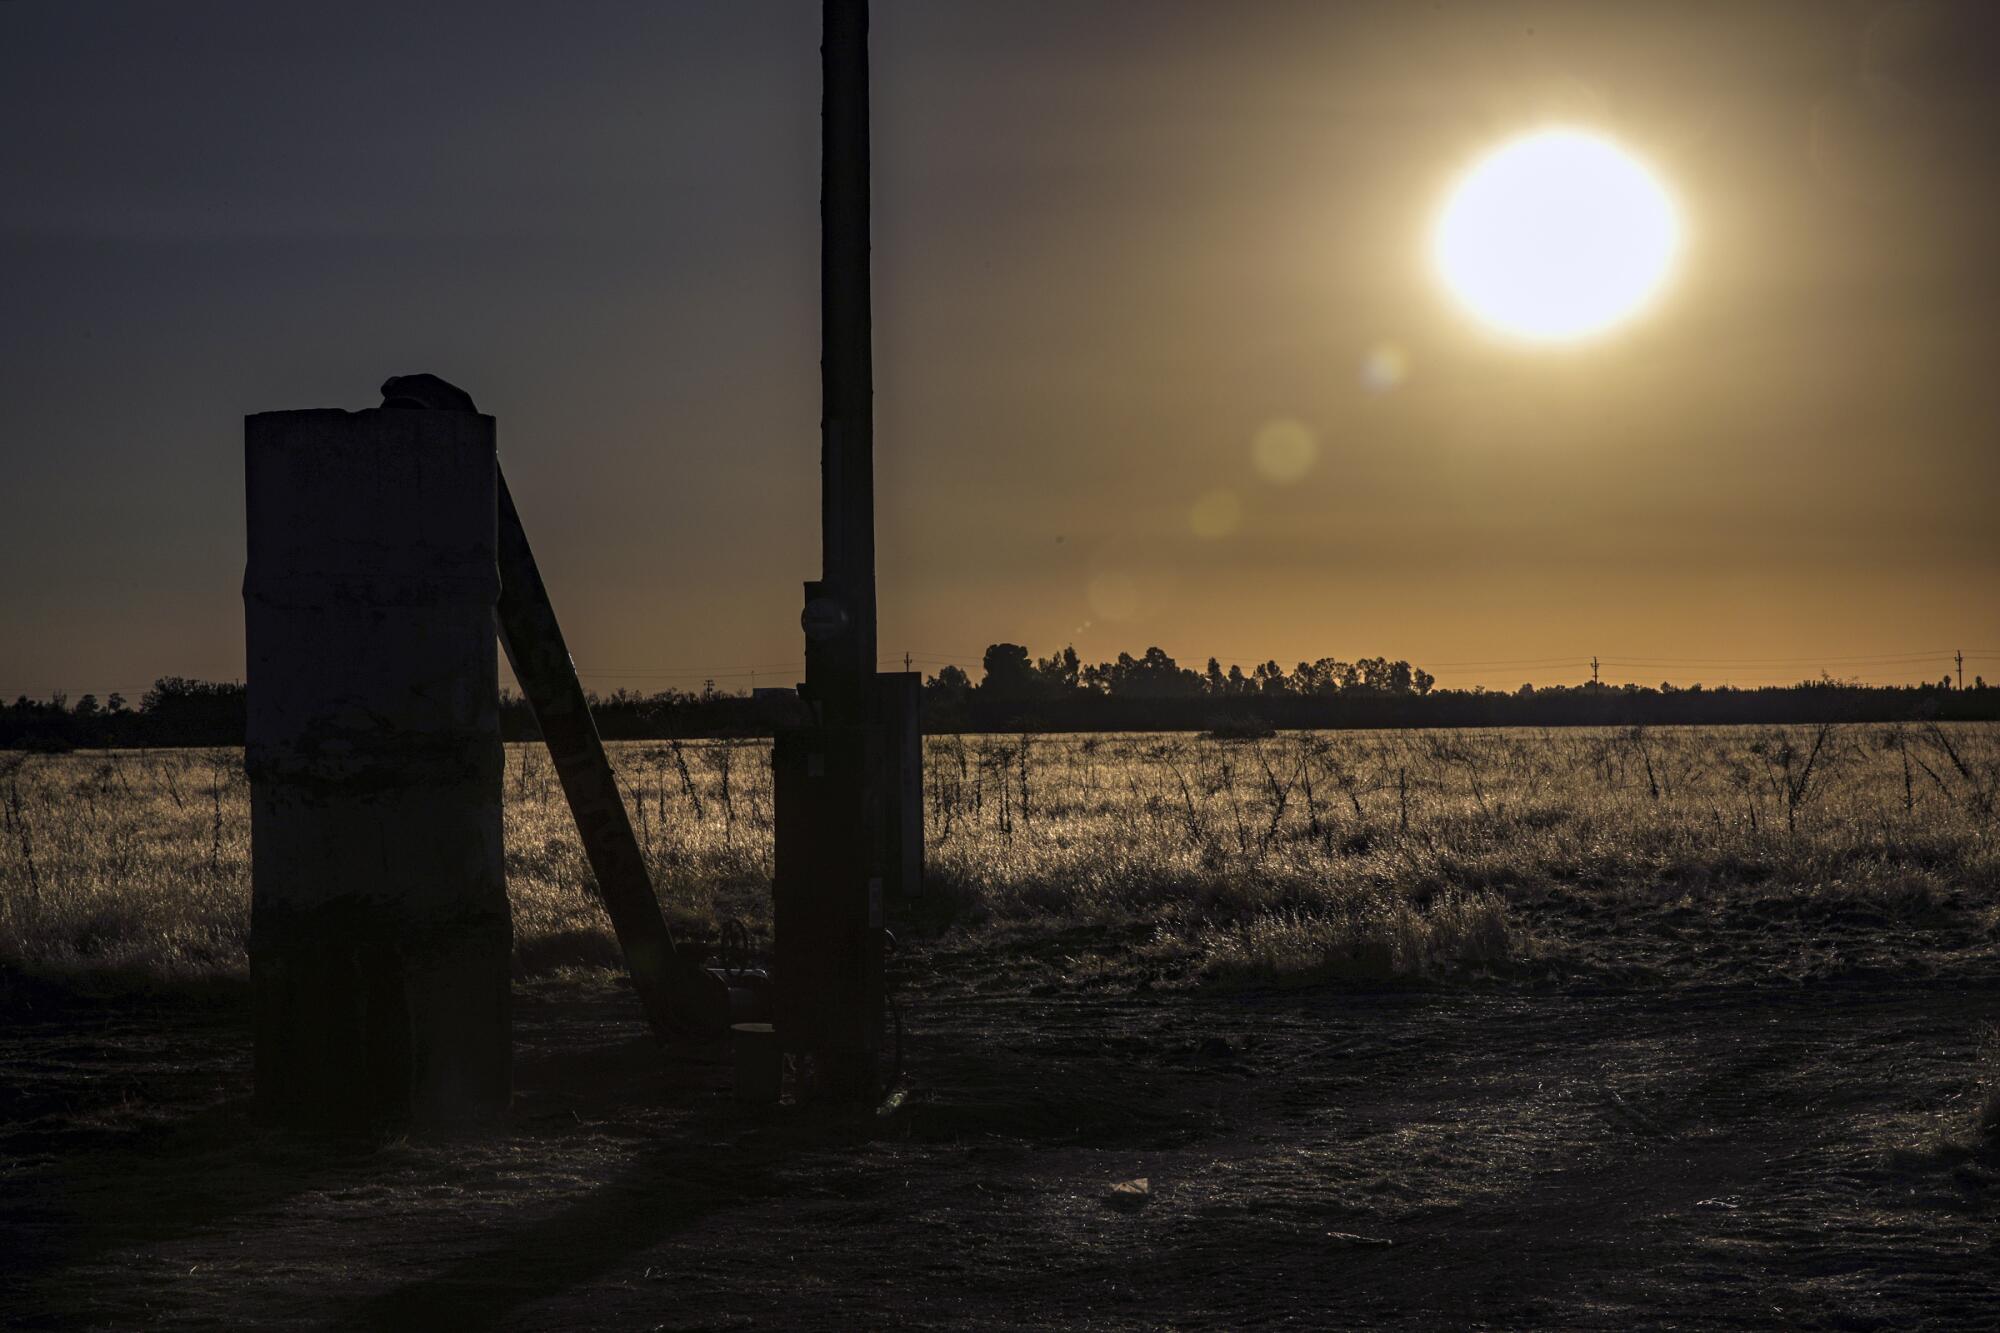 The standpipe and pump of an agricultural well are silhouetted at sunset near the community of Sultana. 